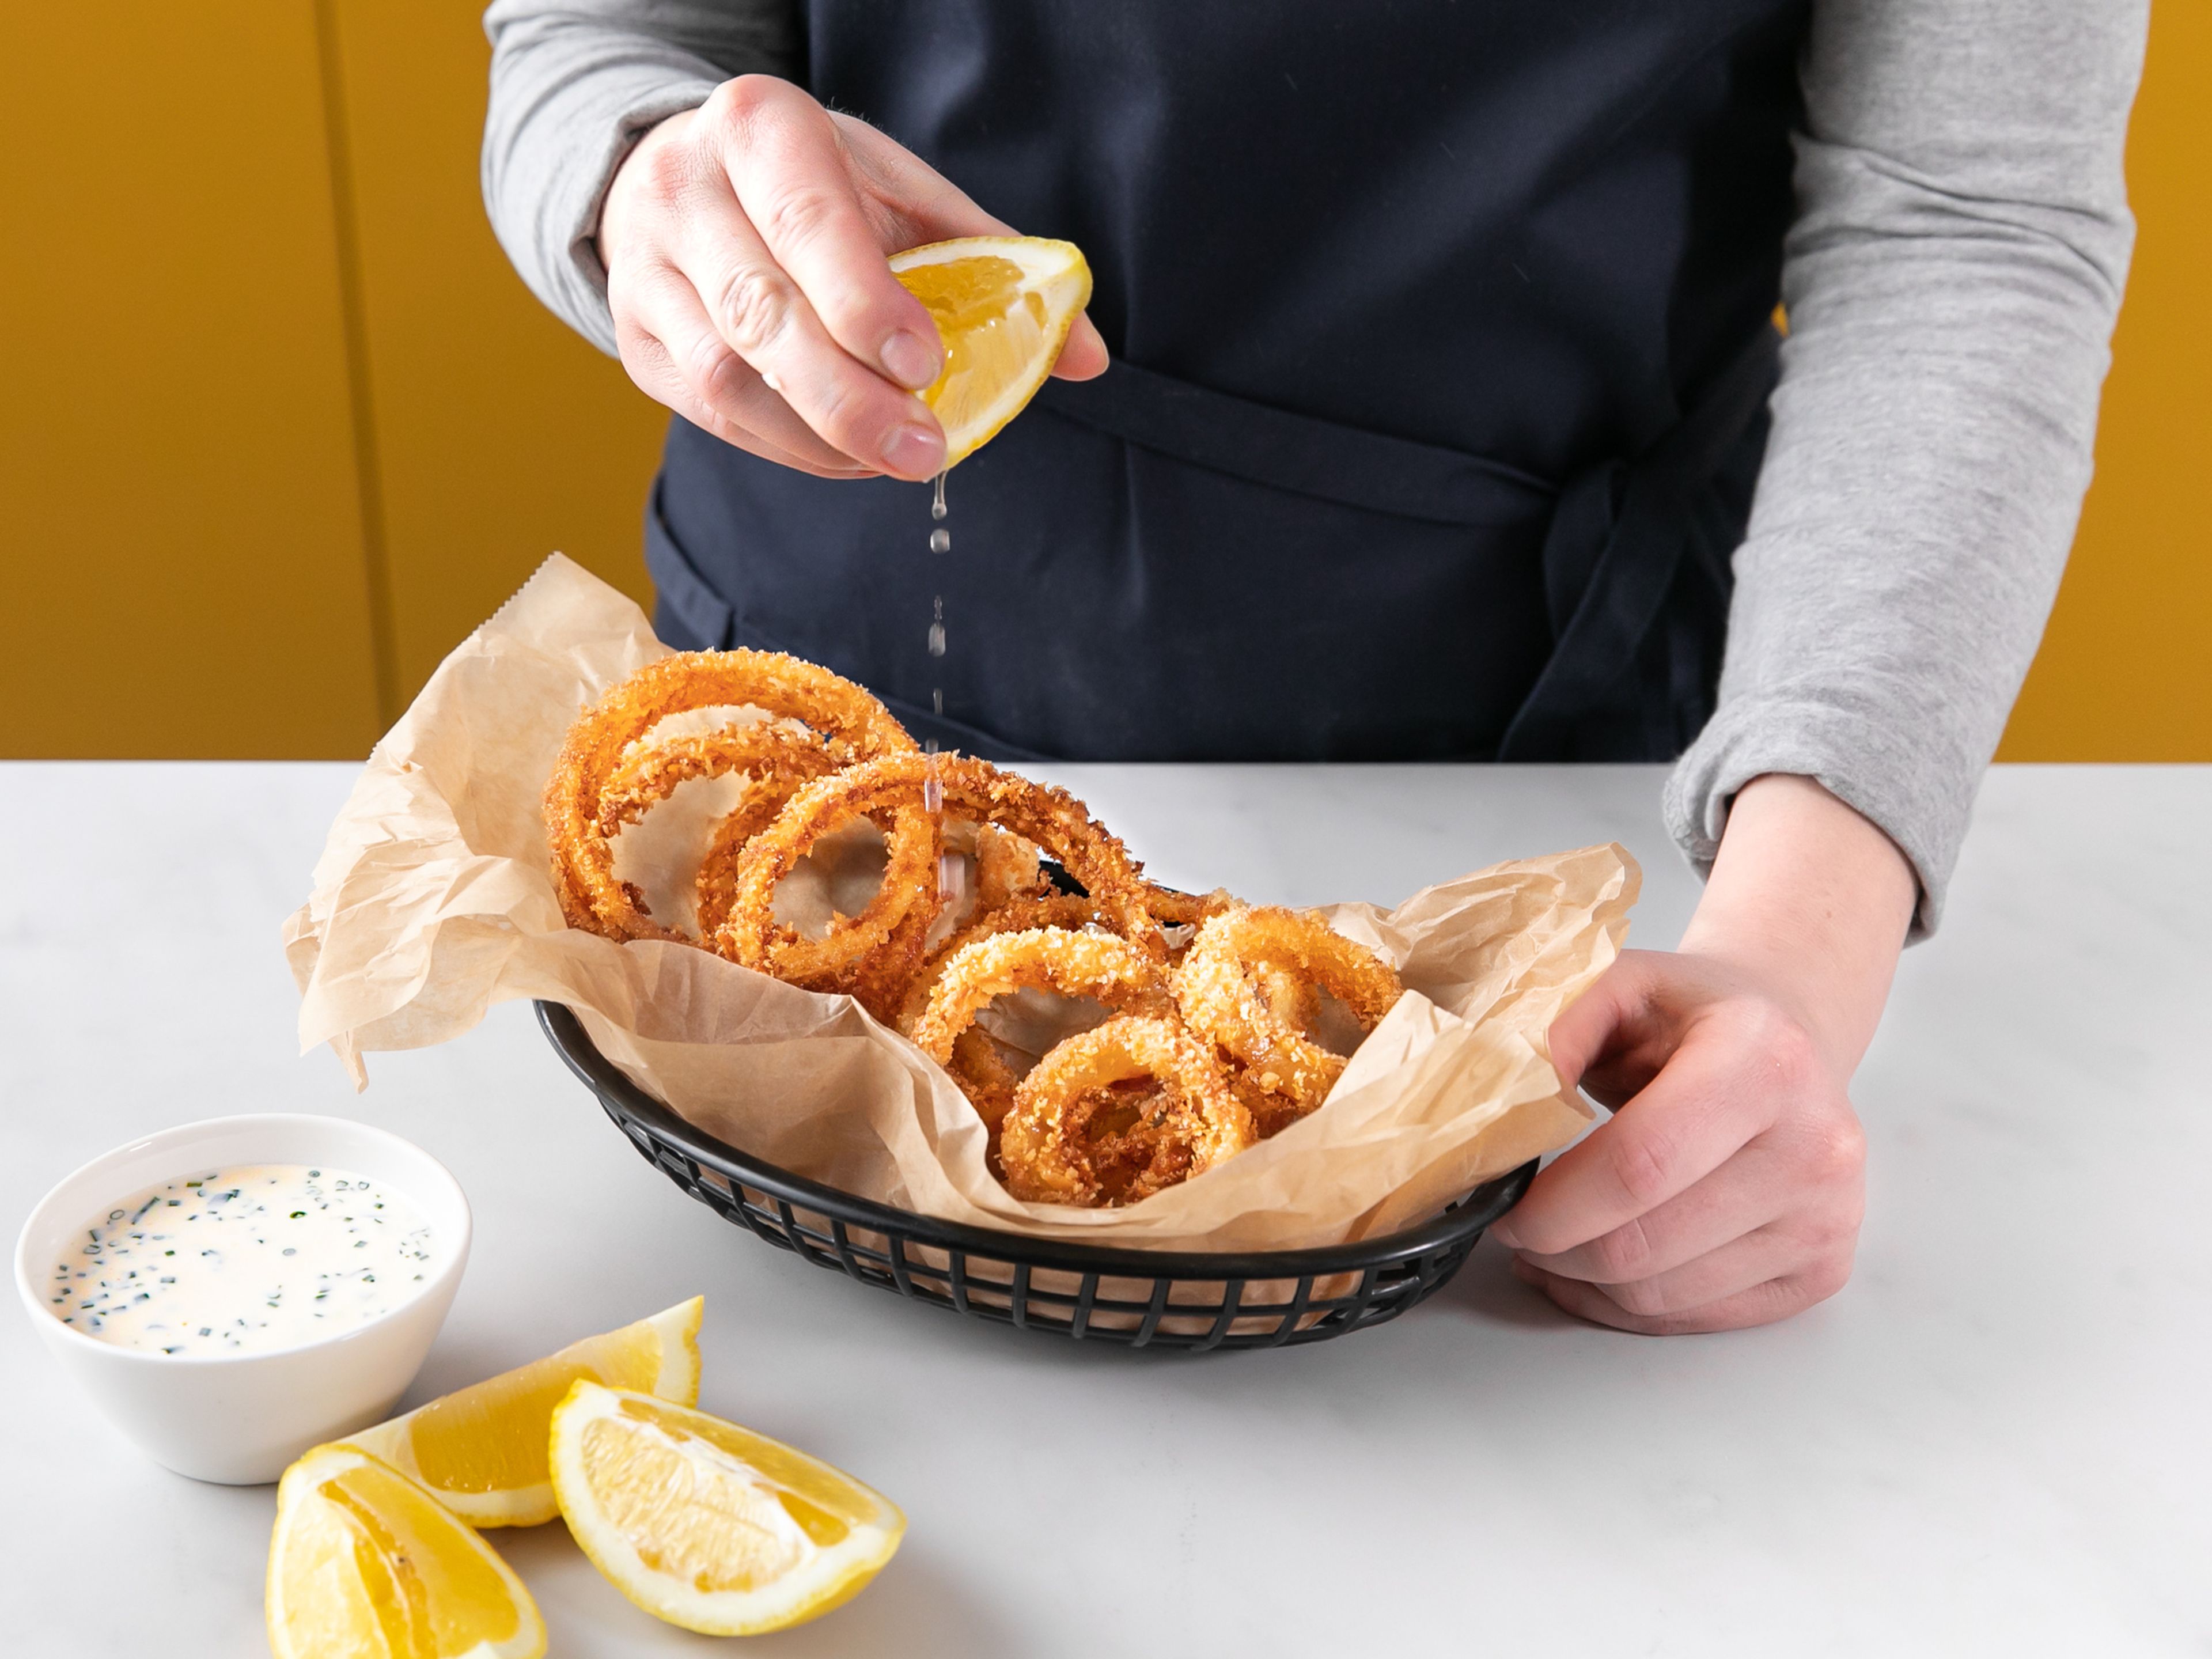 Serve hot onion rings with the spicy ranch dip and lemon wedges. Enjoy!